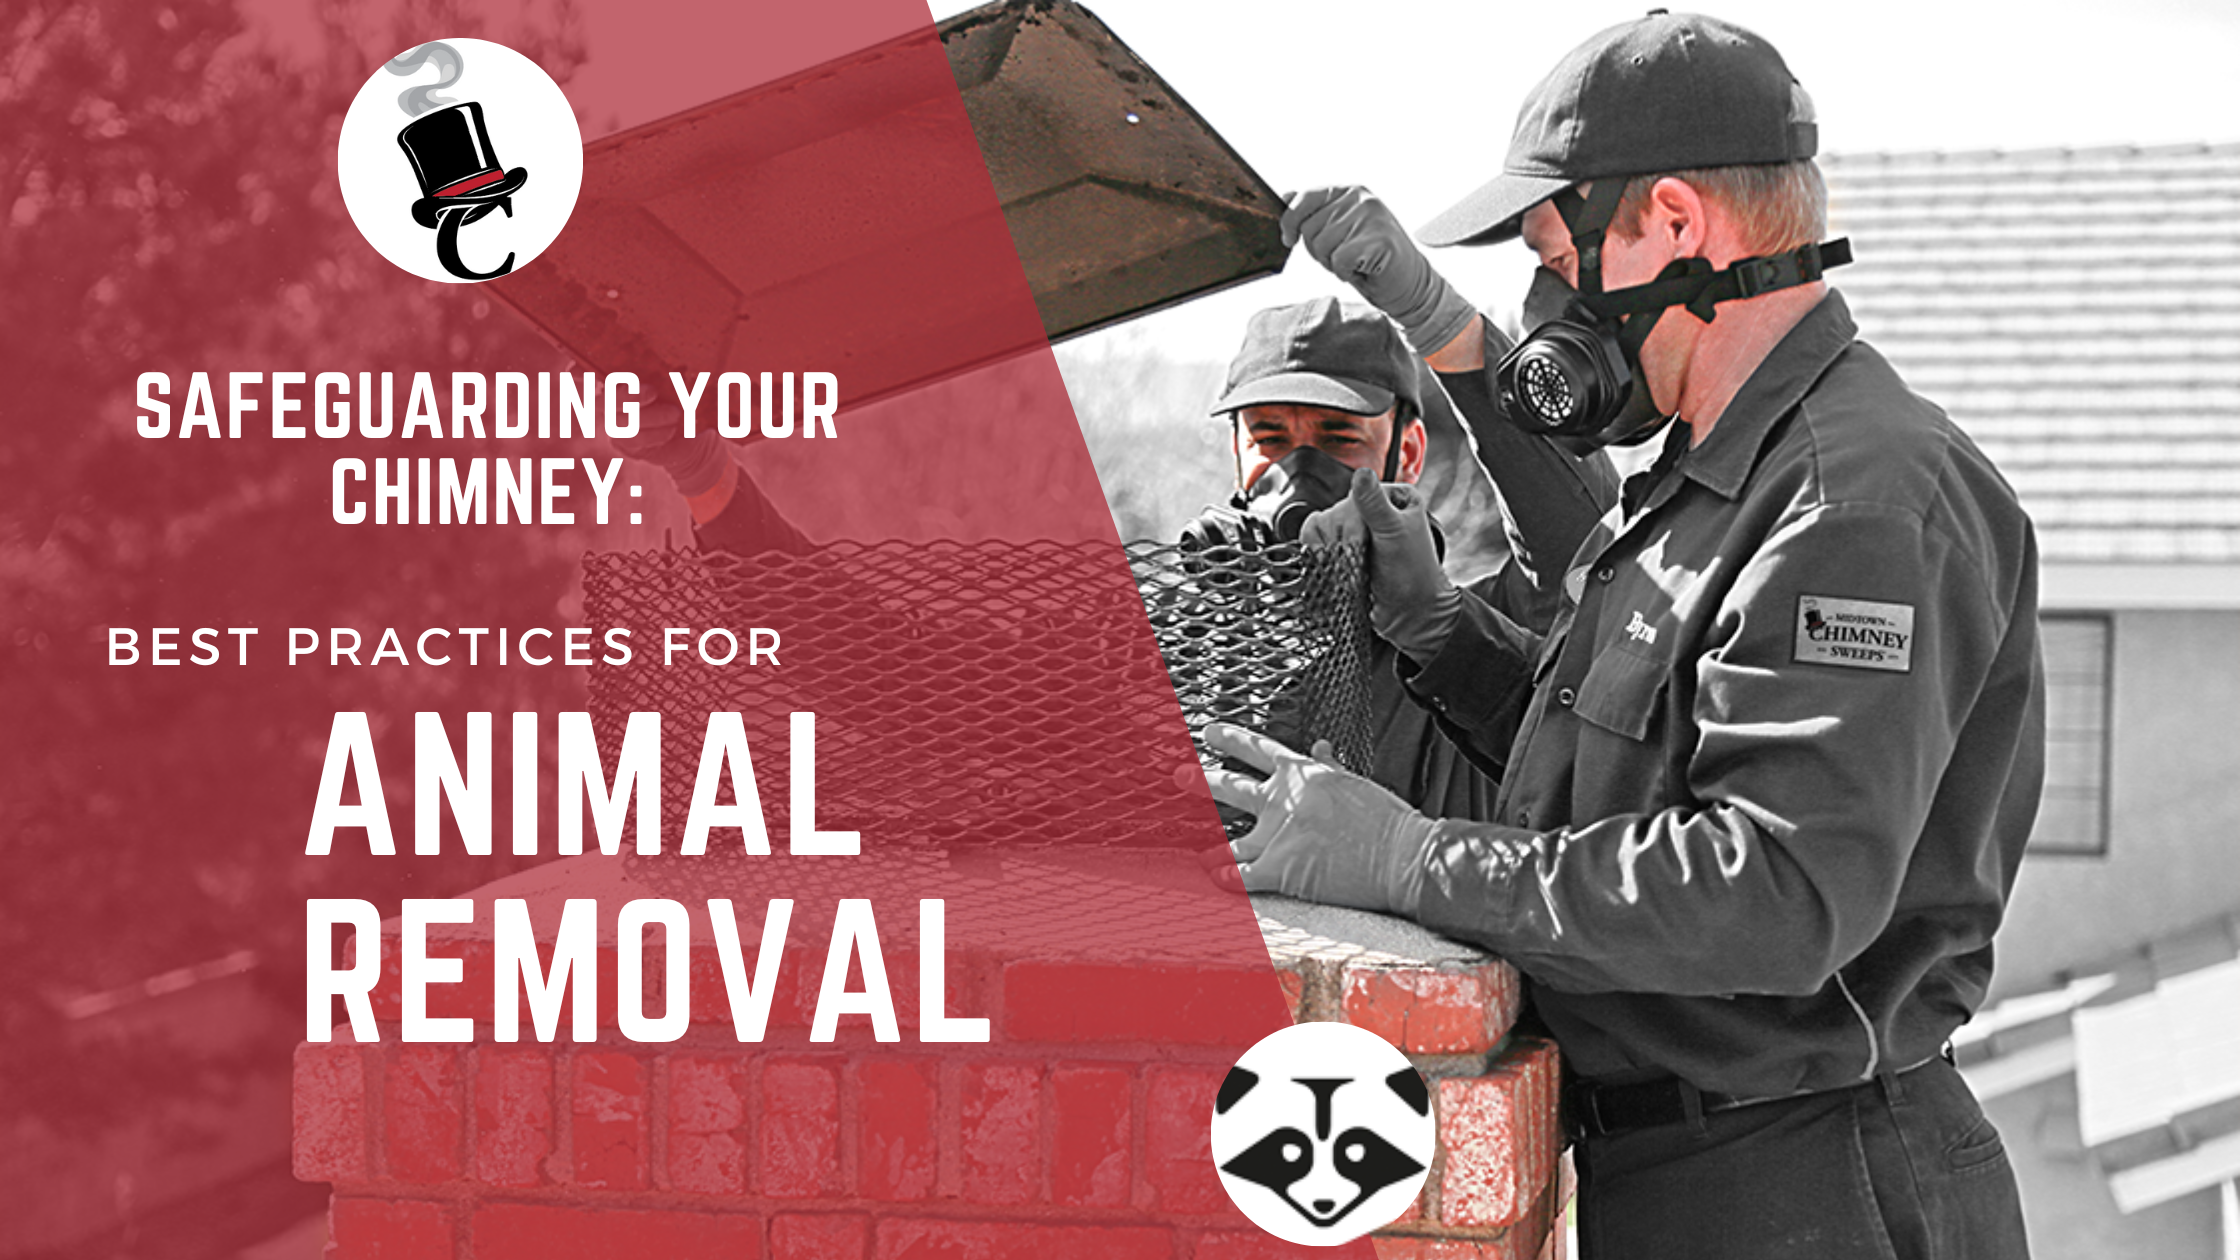 Safeguarding your Chimney: Best Animal Removal Practices